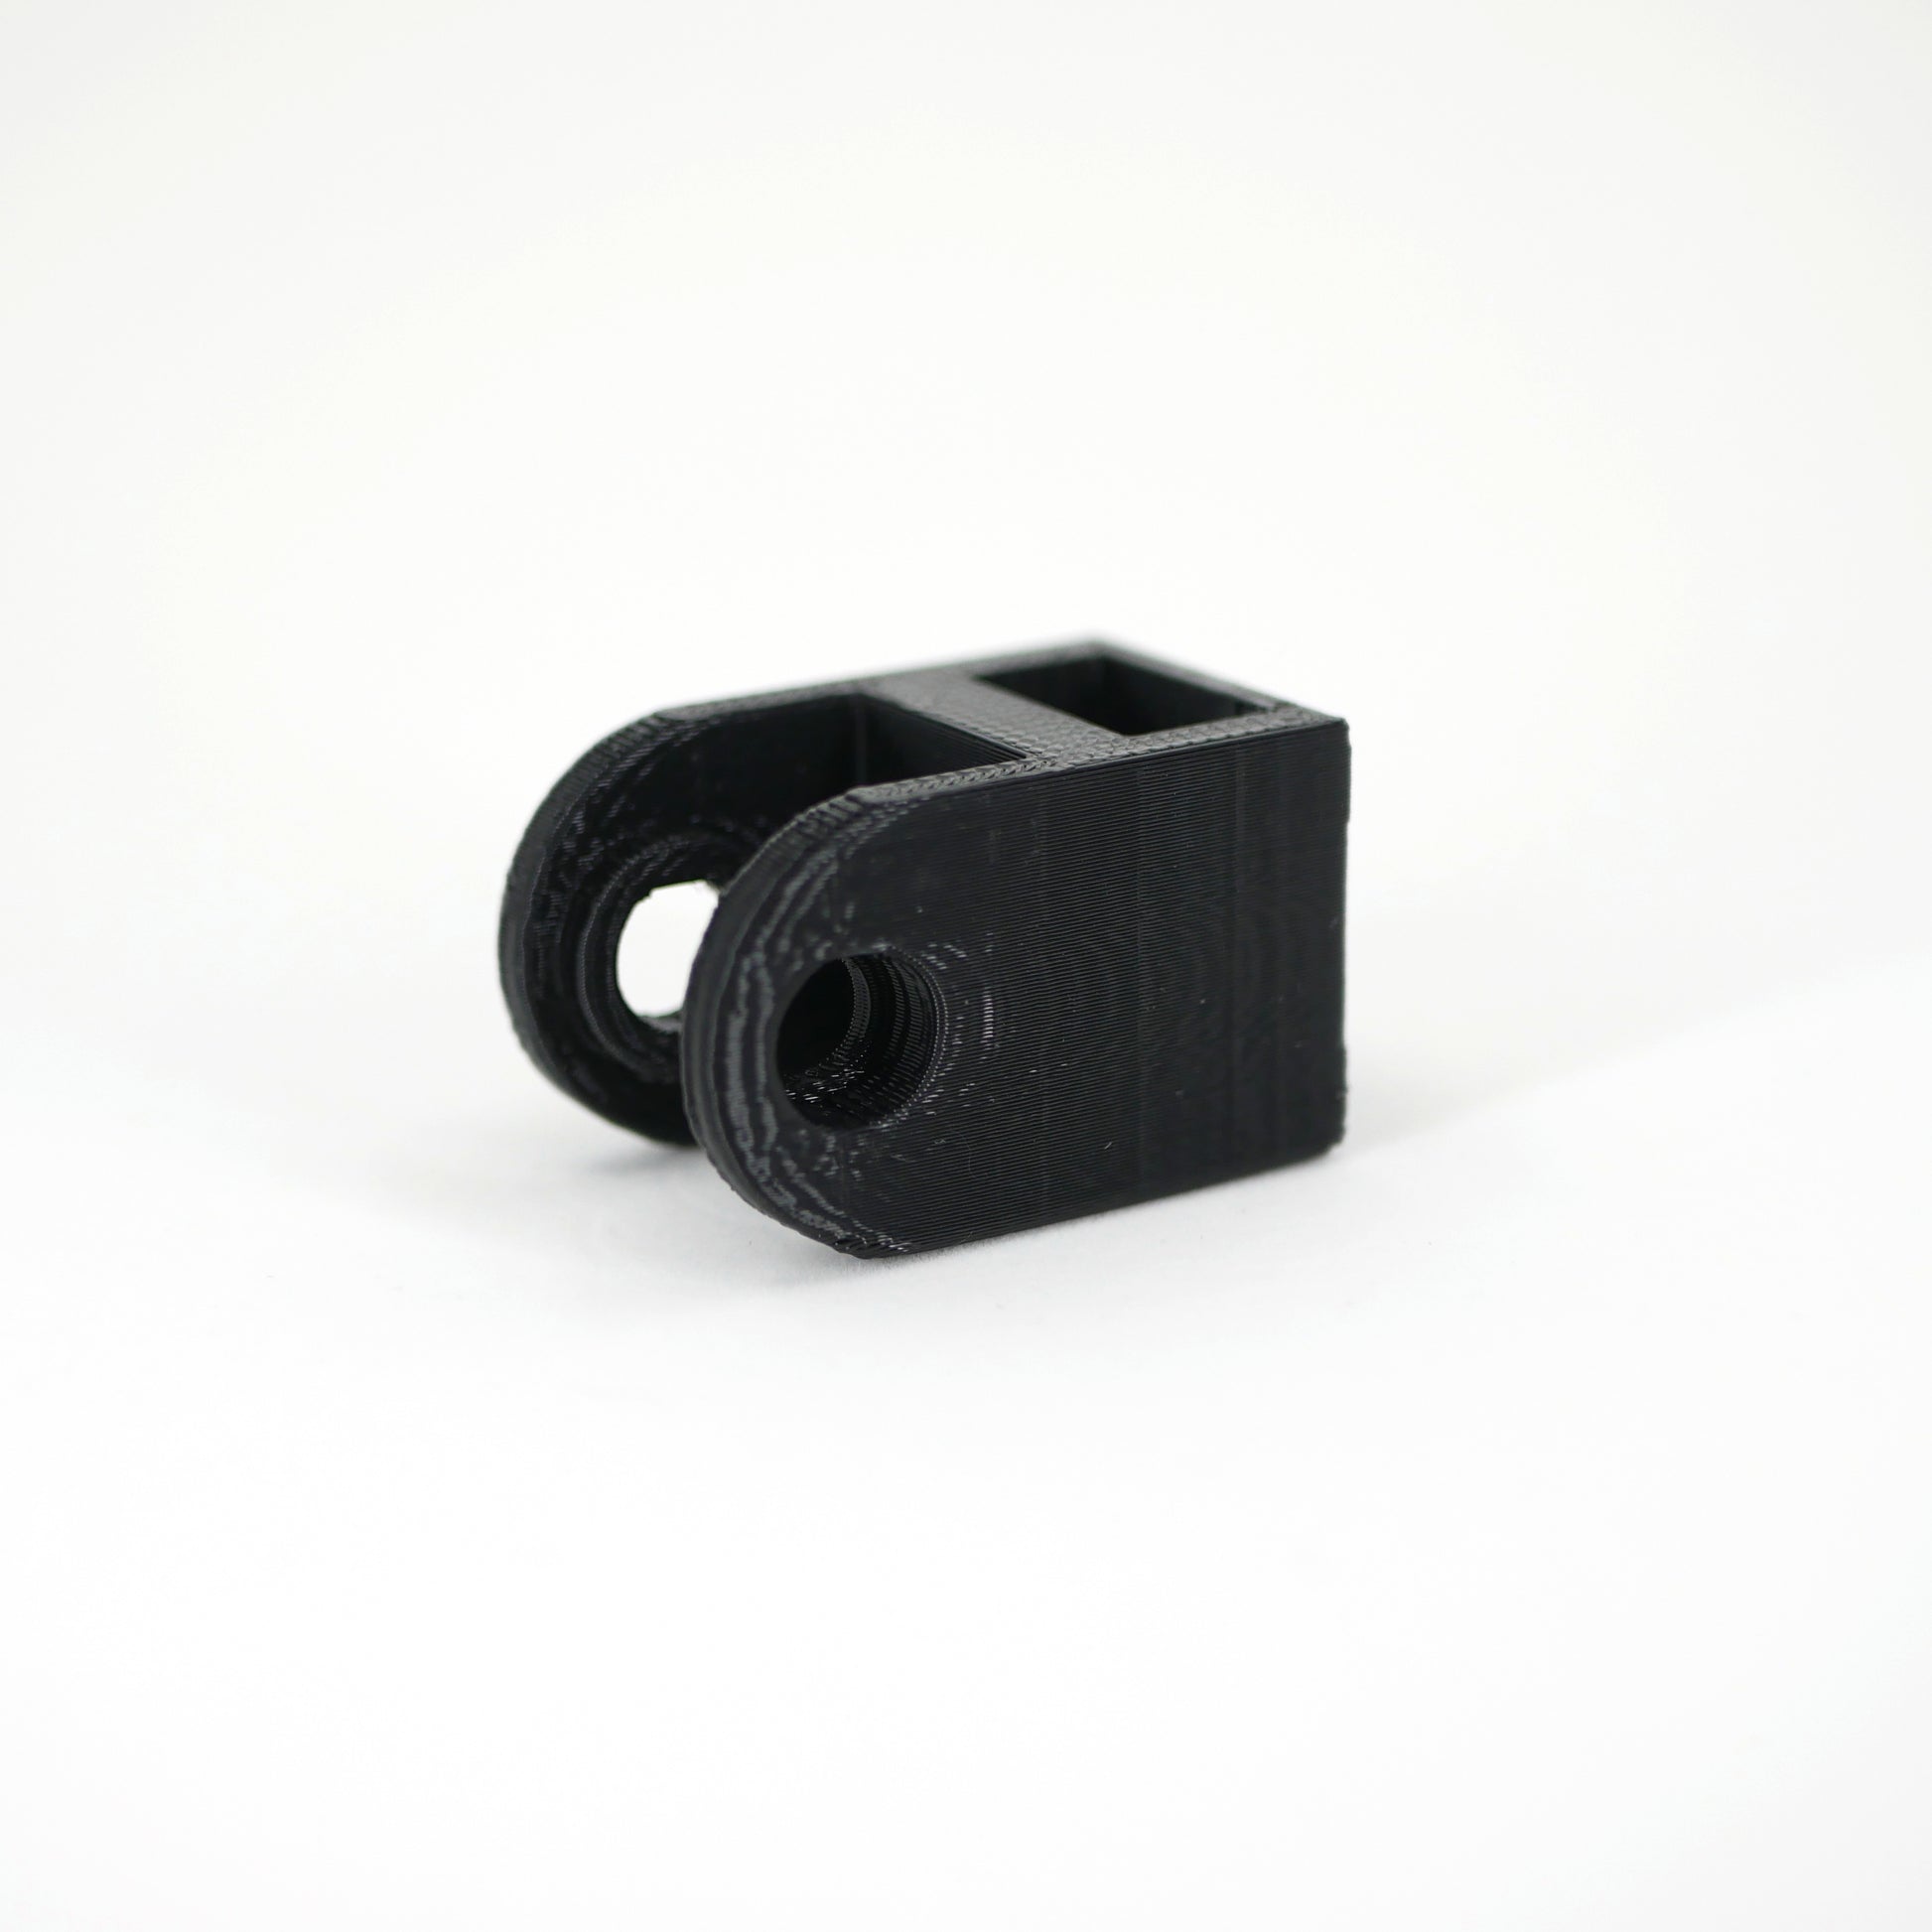 The right side of a black HyperX QuadCast microphone mount adapter.